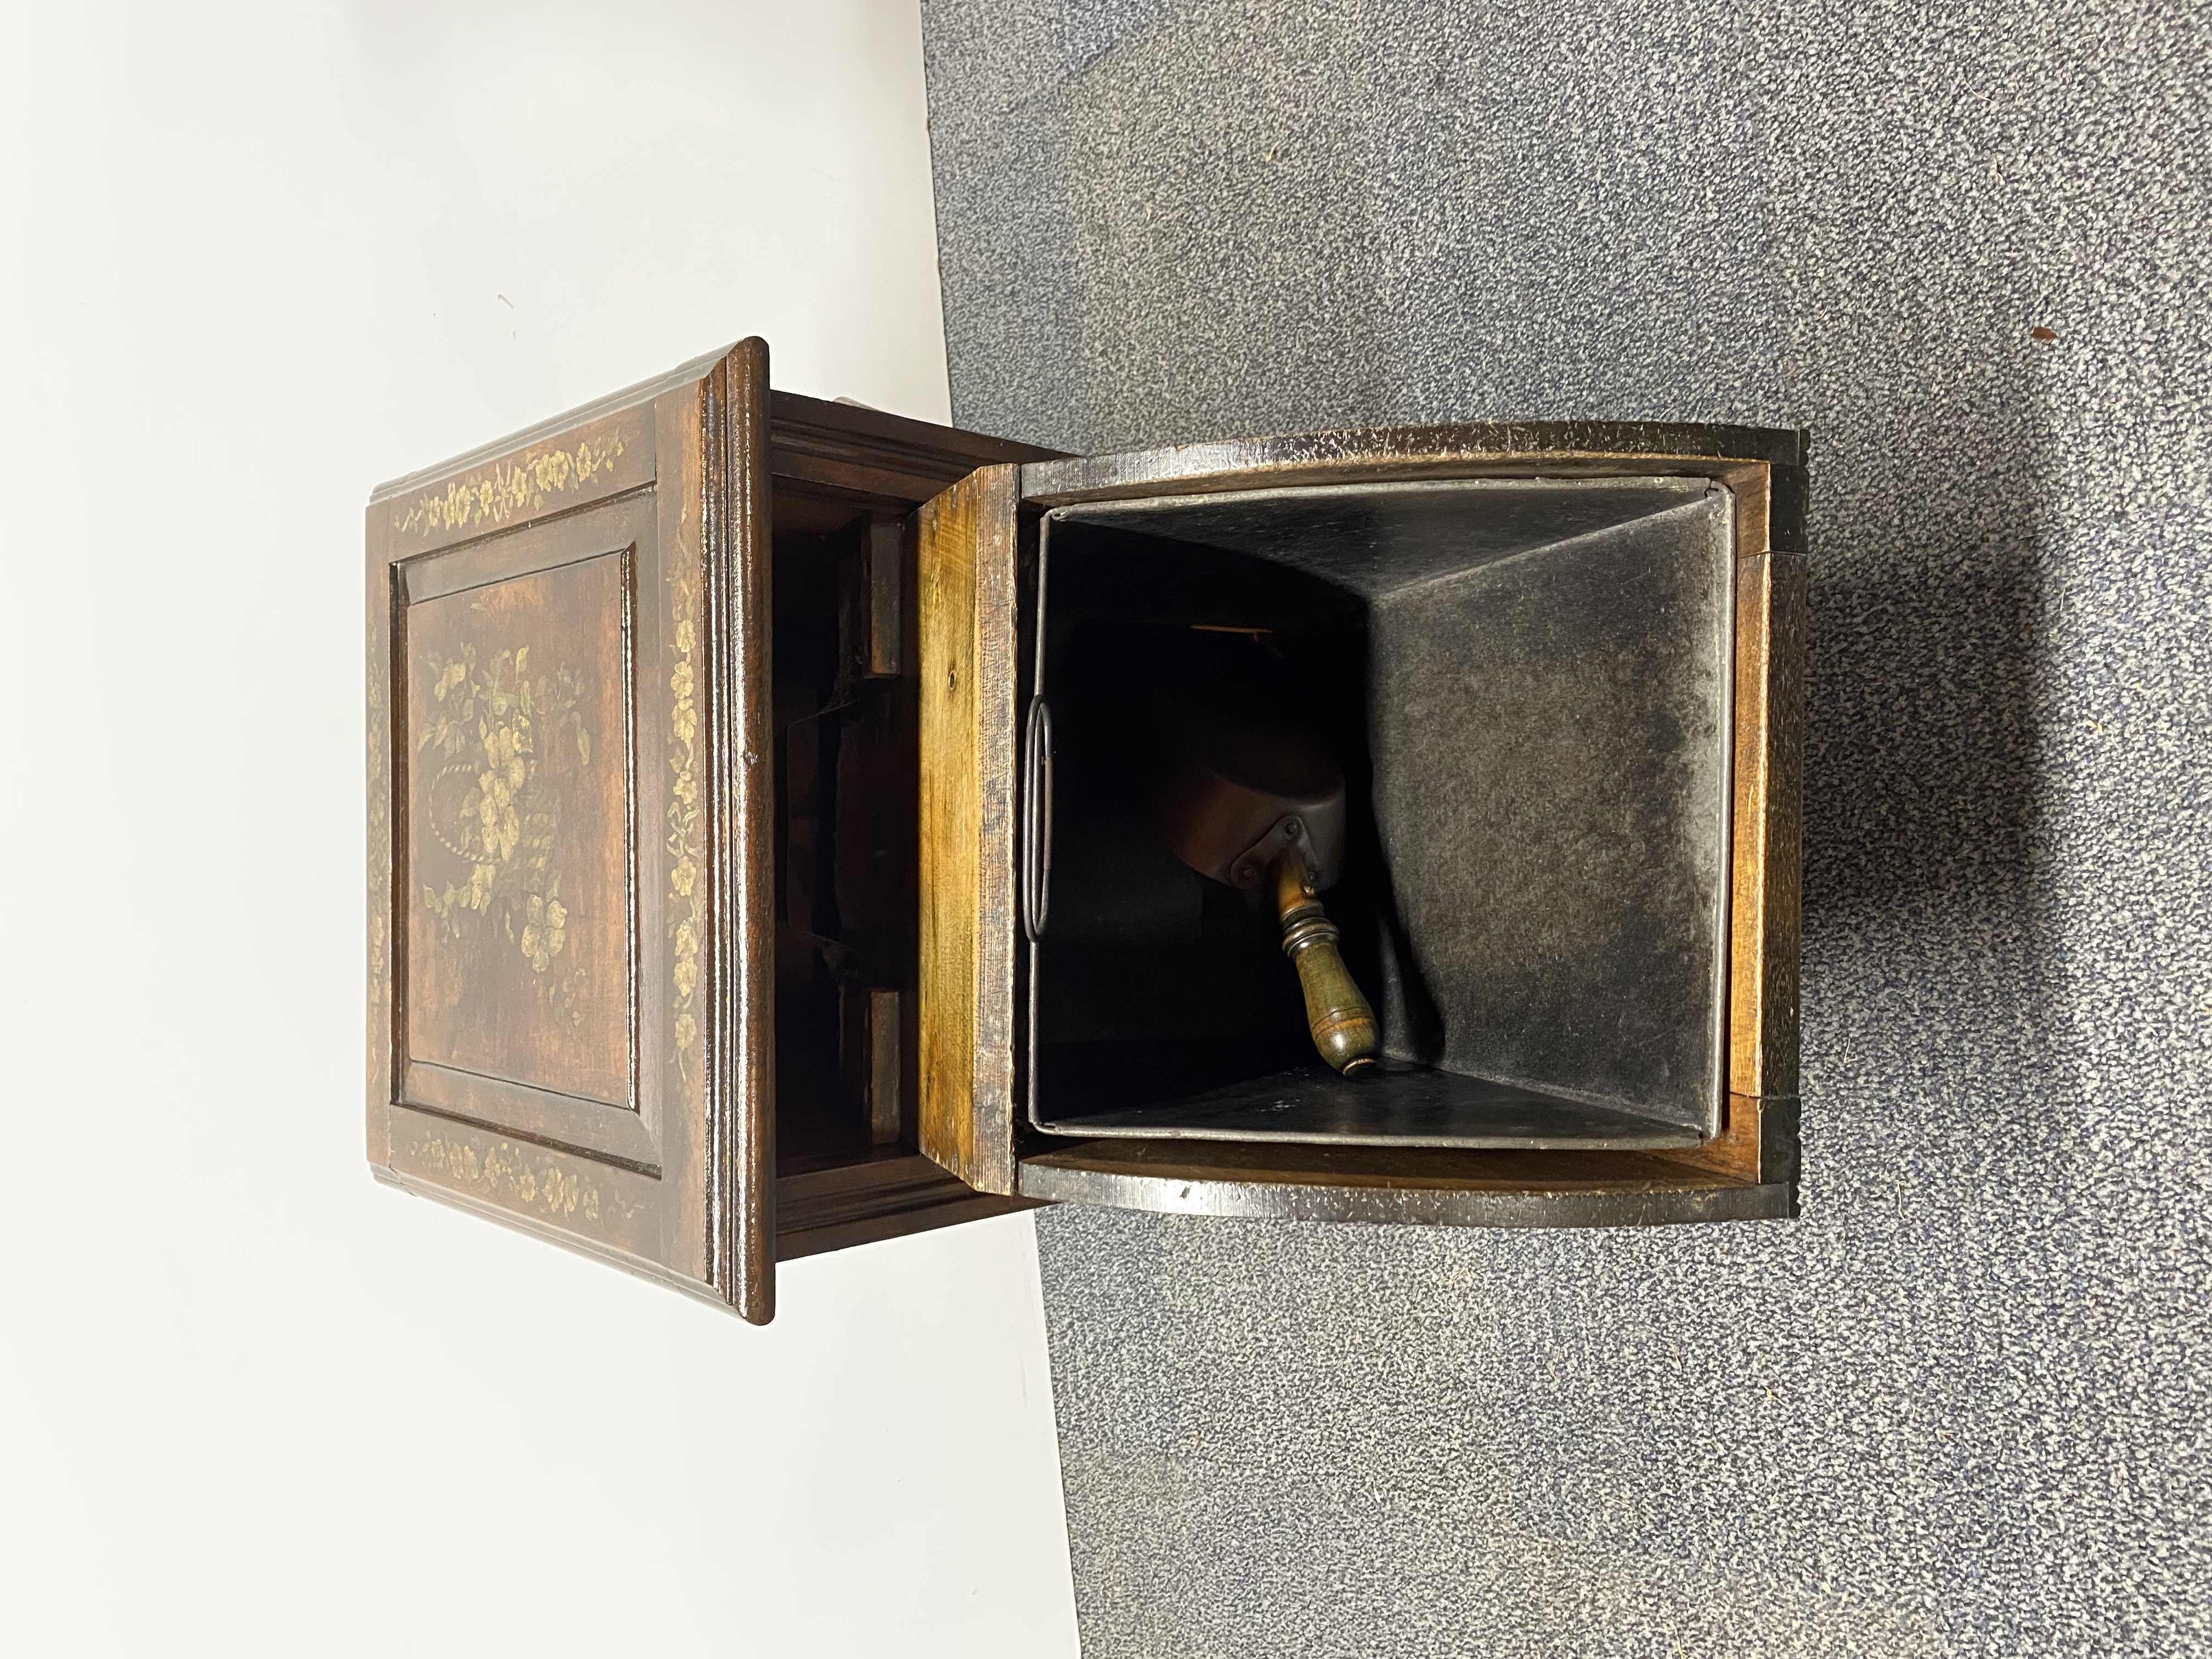 A Victorian painted coal box and small cabinet, coal box 38 x 38 x 52cm. - Image 2 of 2